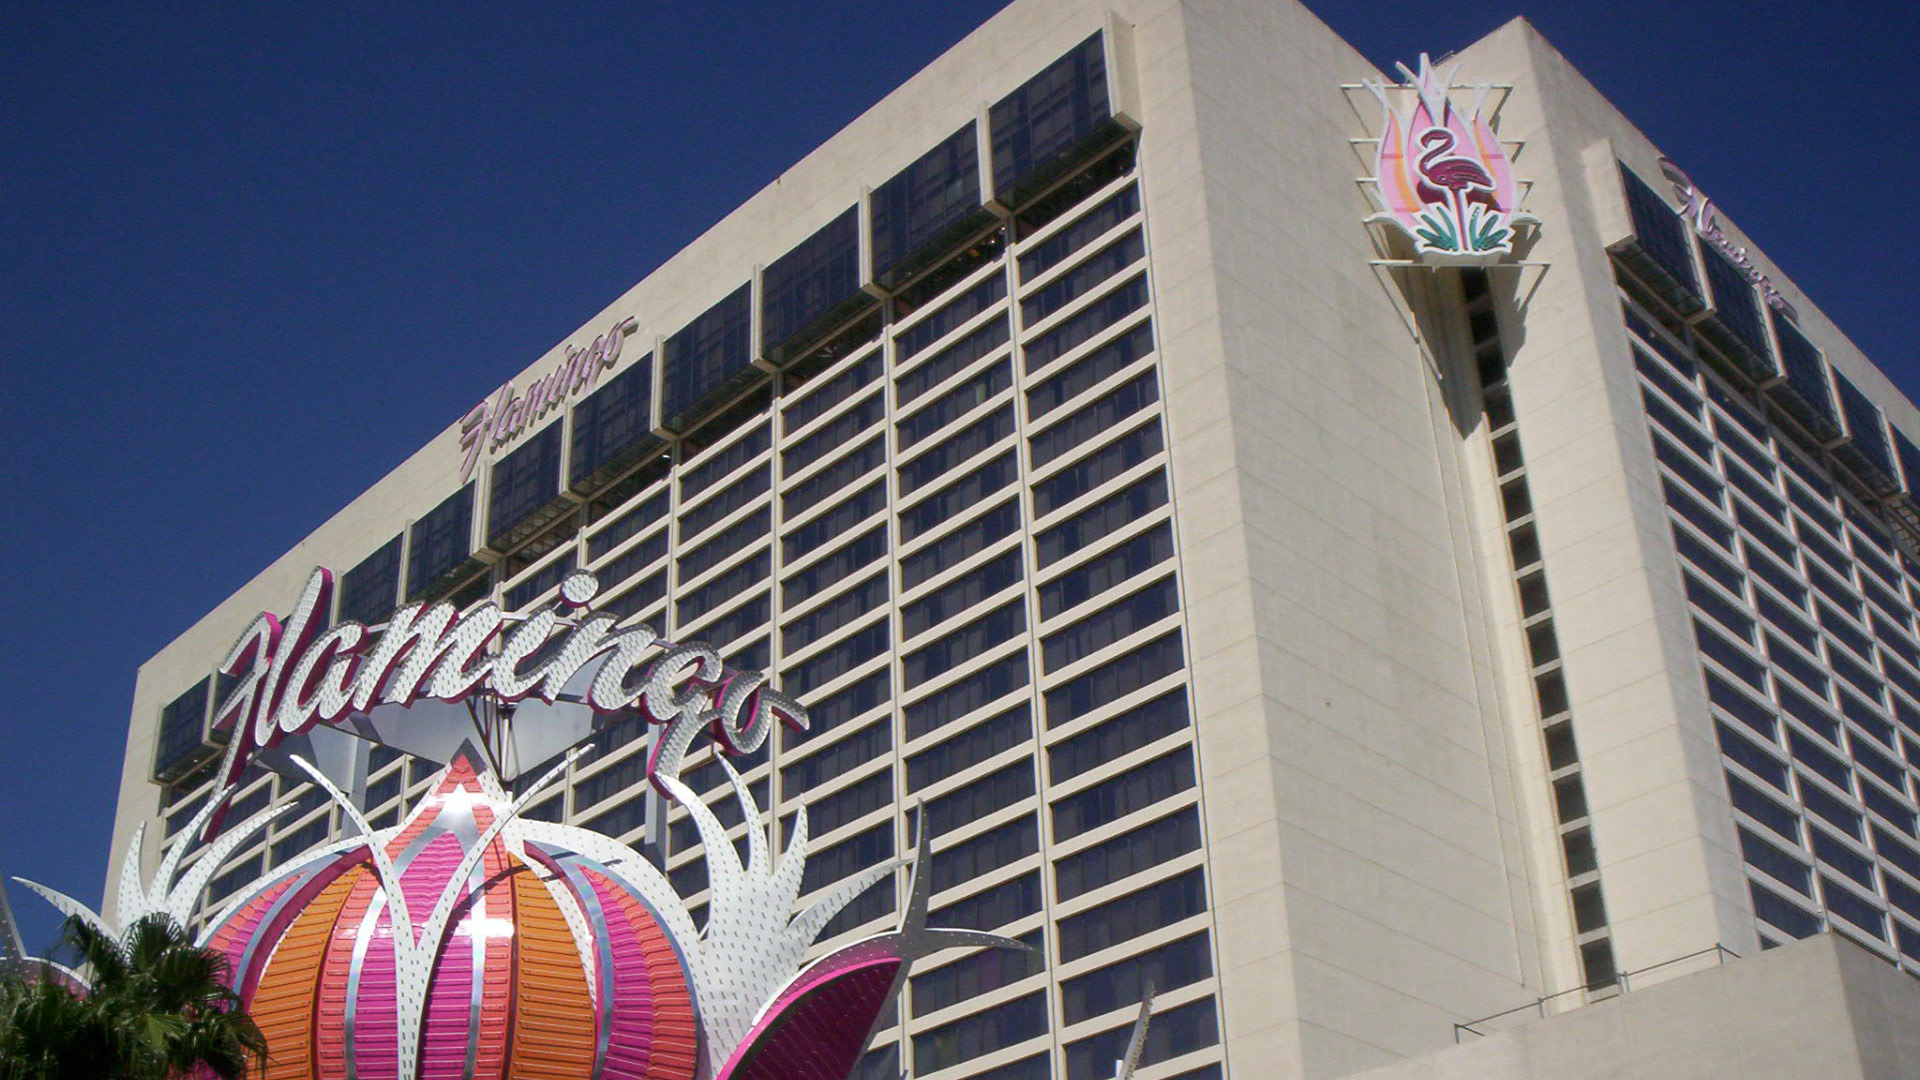 Flamingo Las Vegas Hotel & Casino Review: What To REALLY Expect If